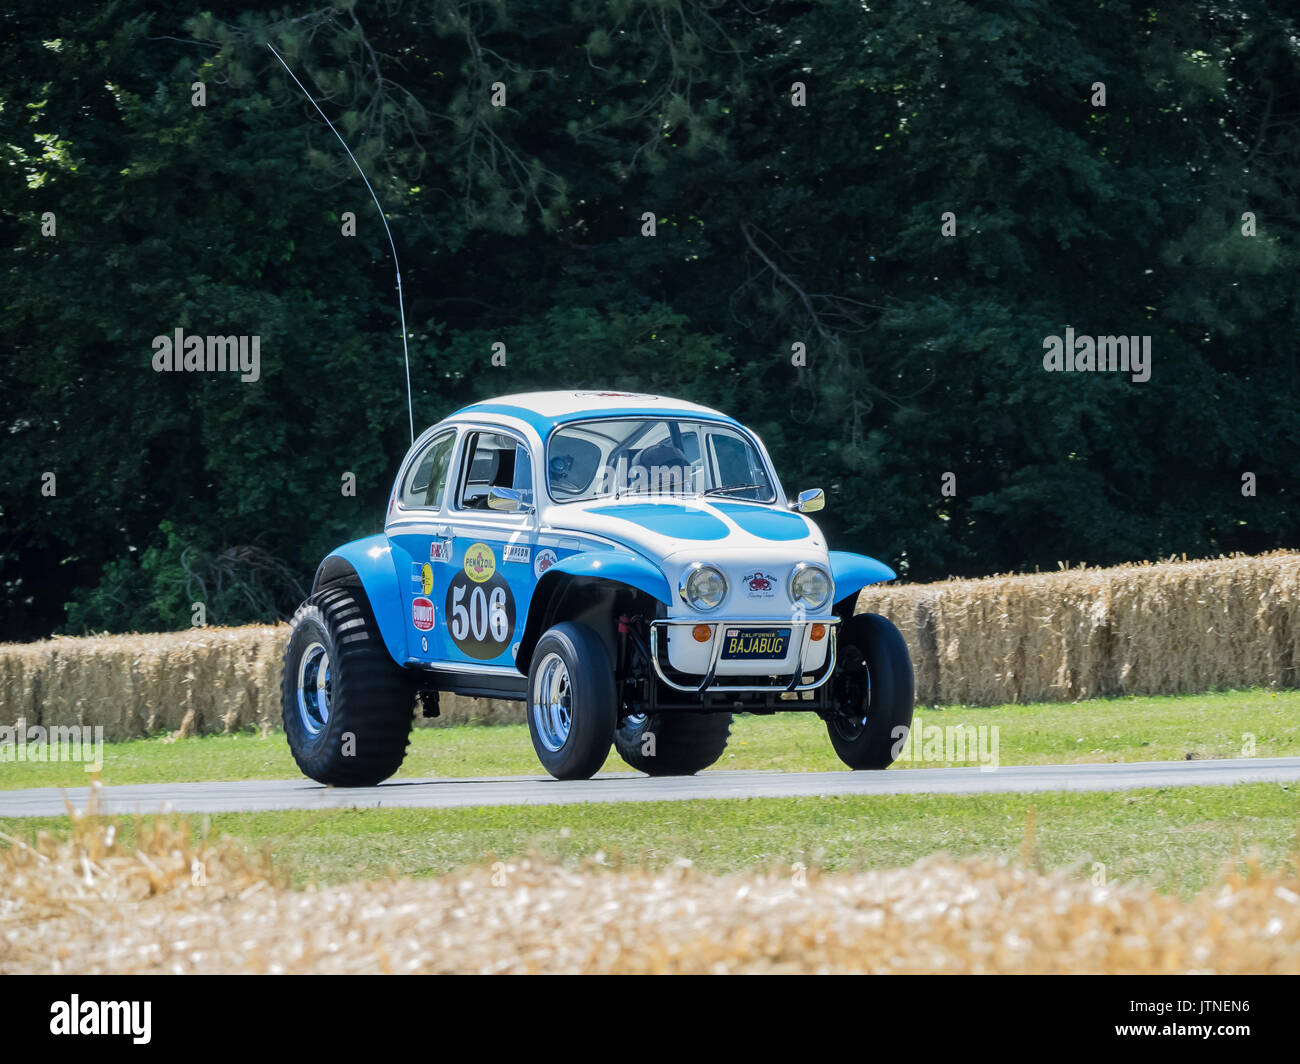 Baja Bug VW Coccinelle ( Sand Scorcher Tamiya model toy full size) repro à Goodwood festival of speed 2017 Banque D'Images